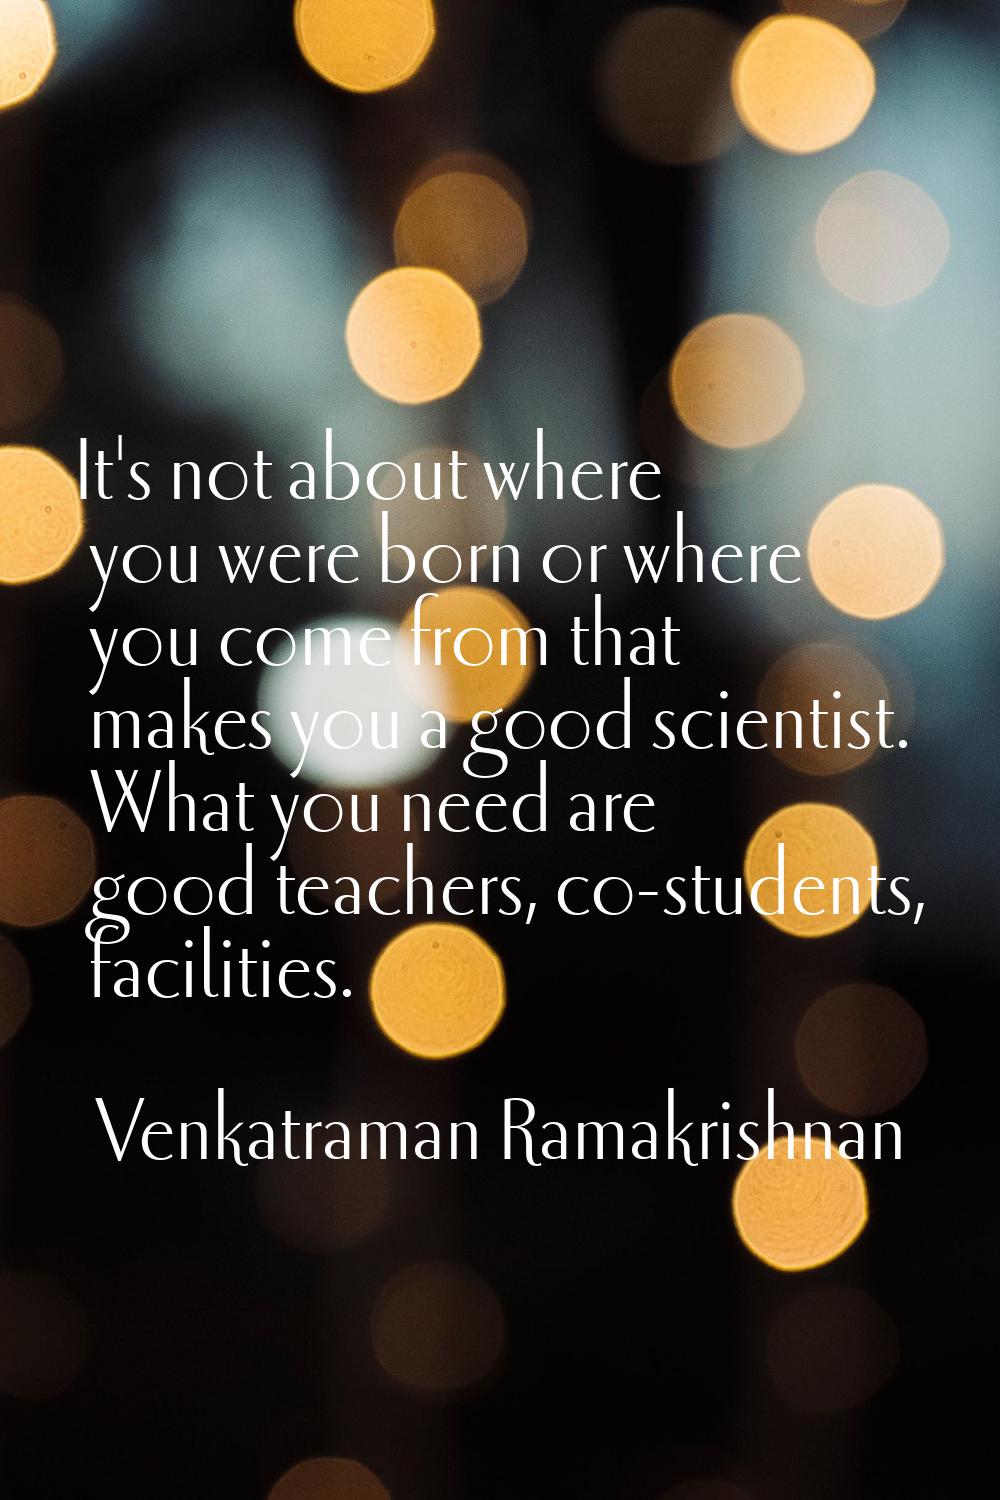 It's not about where you were born or where you come from that makes you a good scientist. What you